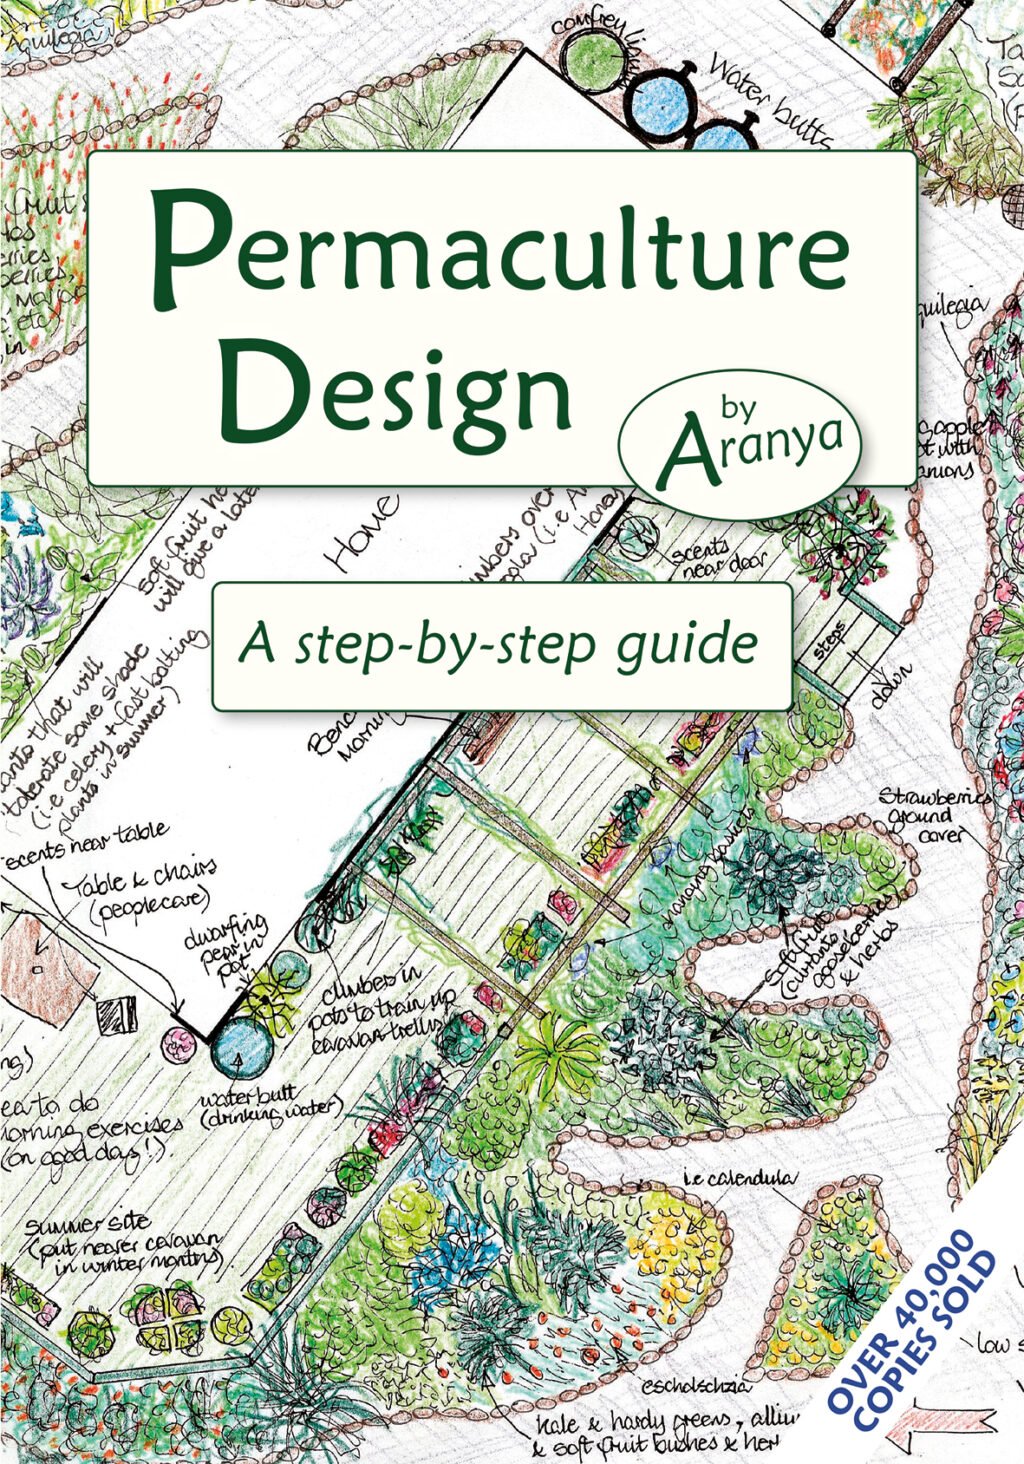 The Permaculture Design cover